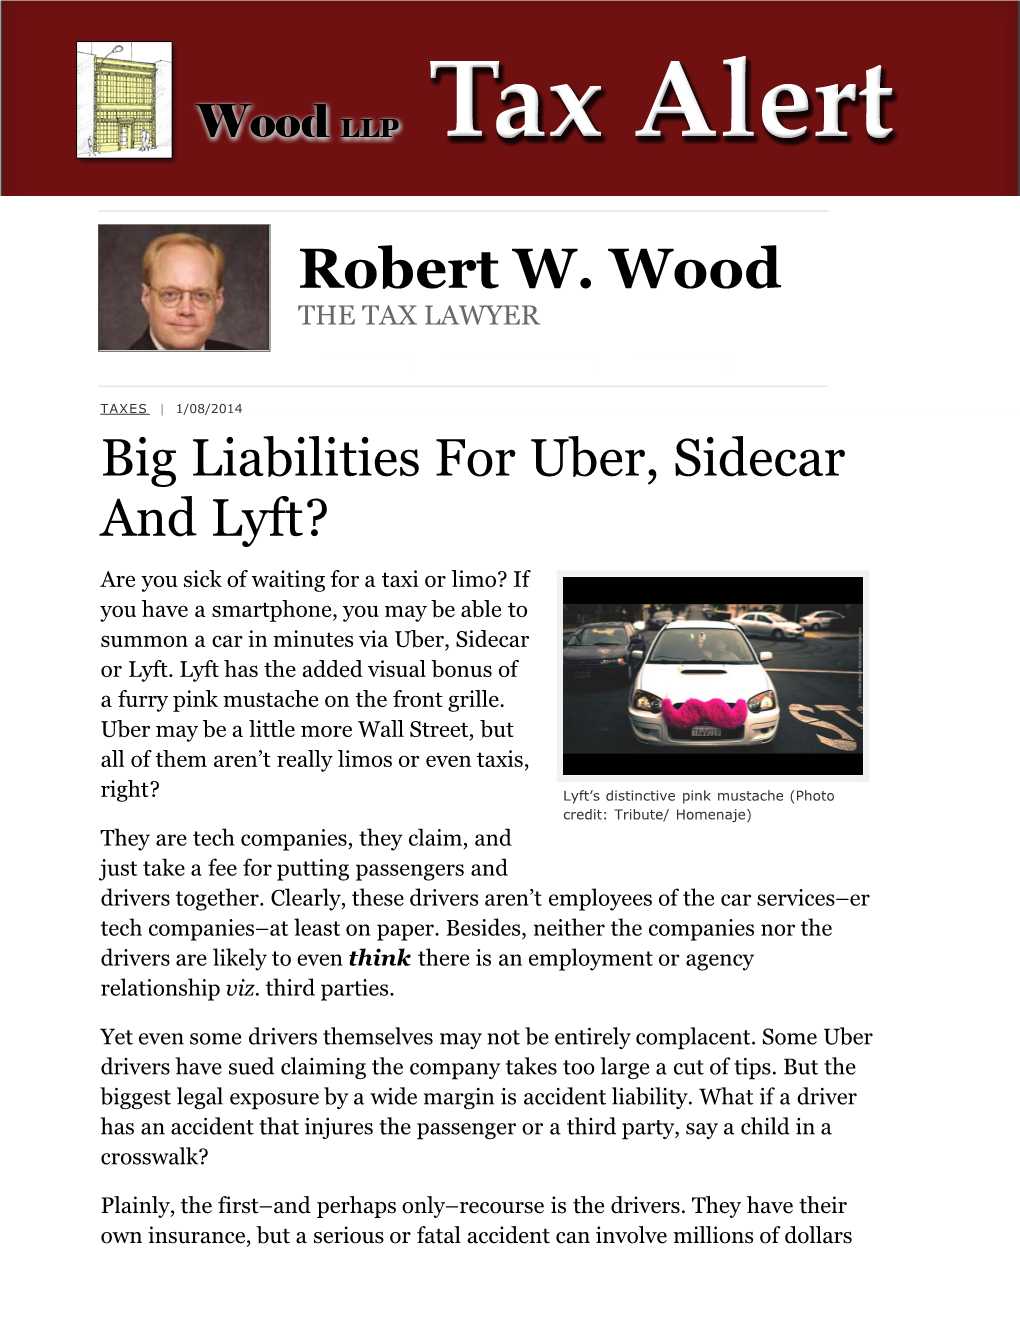 Big Liabilities for Uber, Sidecar and Lyft?